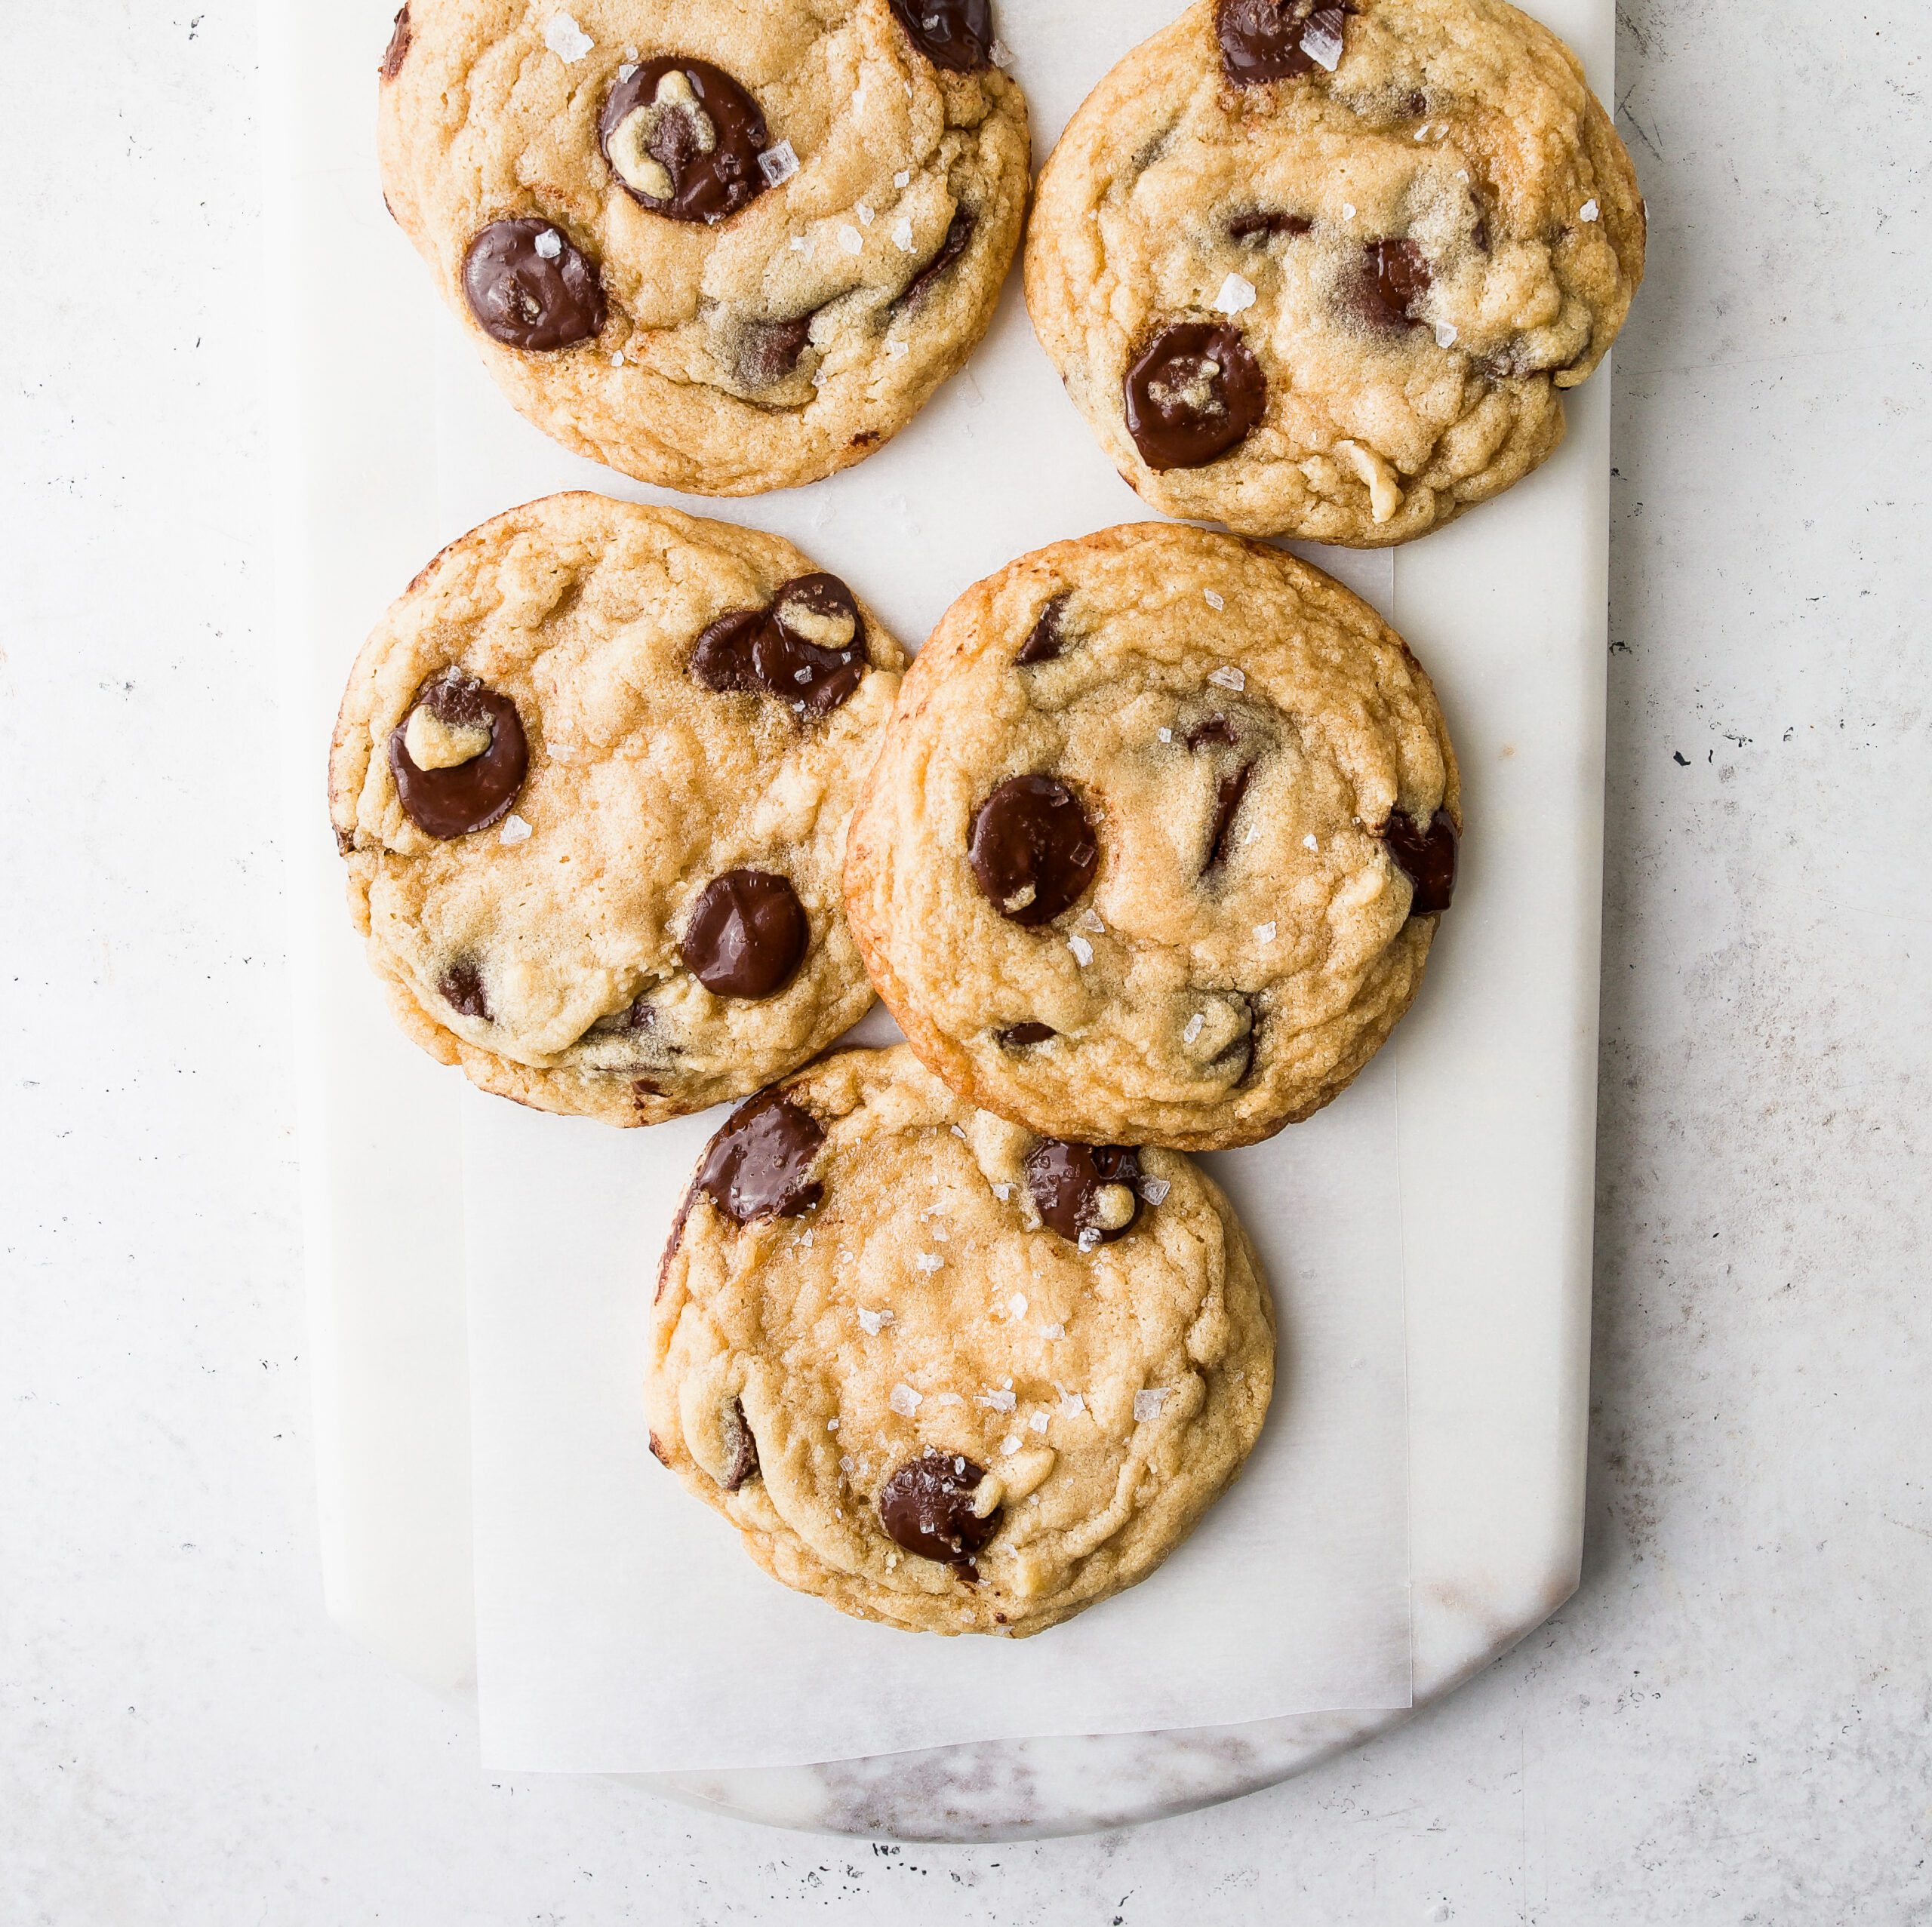 Five chocolate chip cookies on a white marble surface.